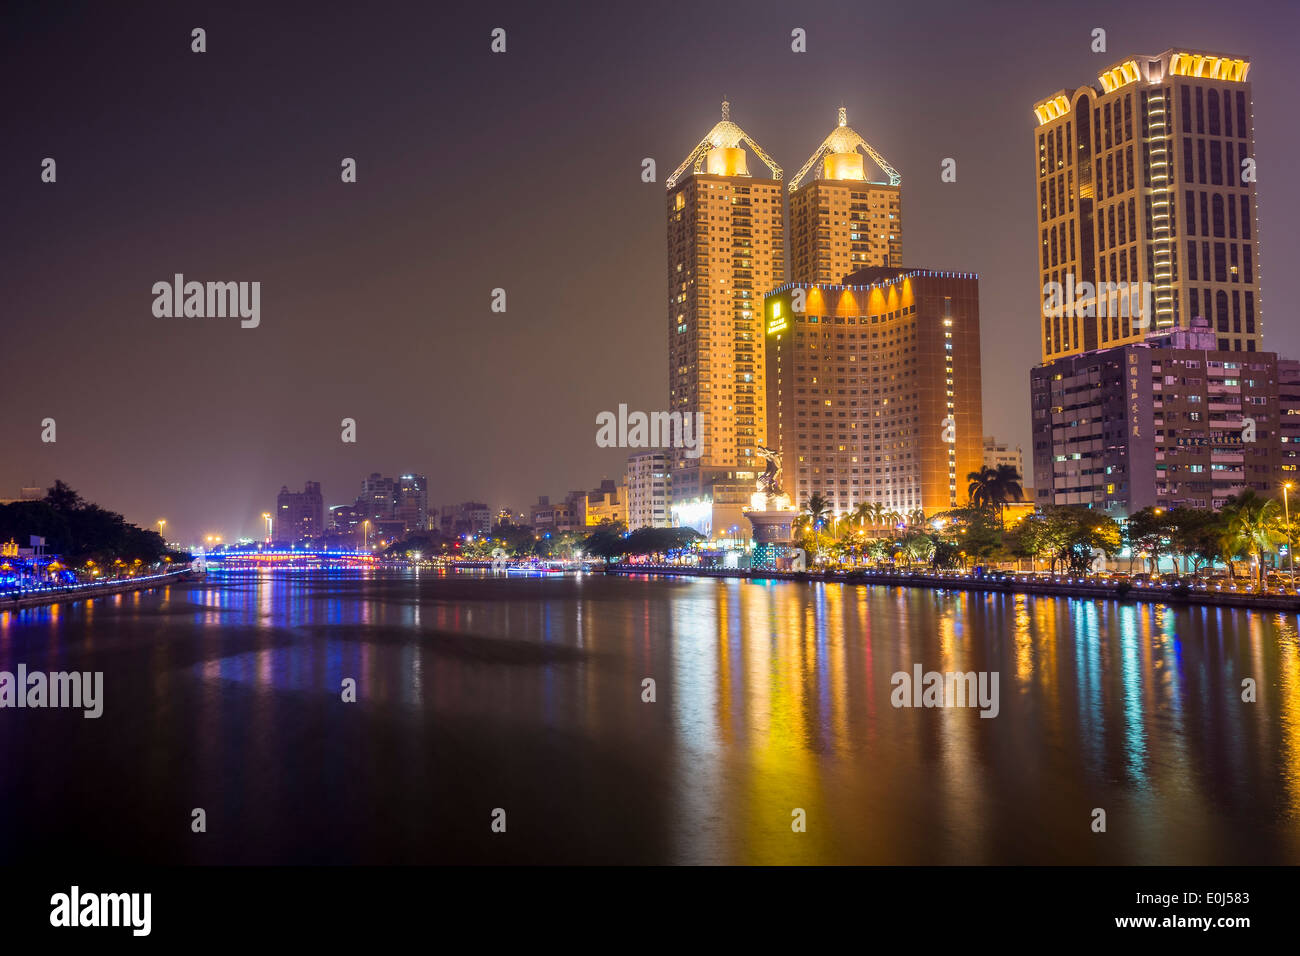 Love River at night in Kaohsiung, Taiwan Stock Photo